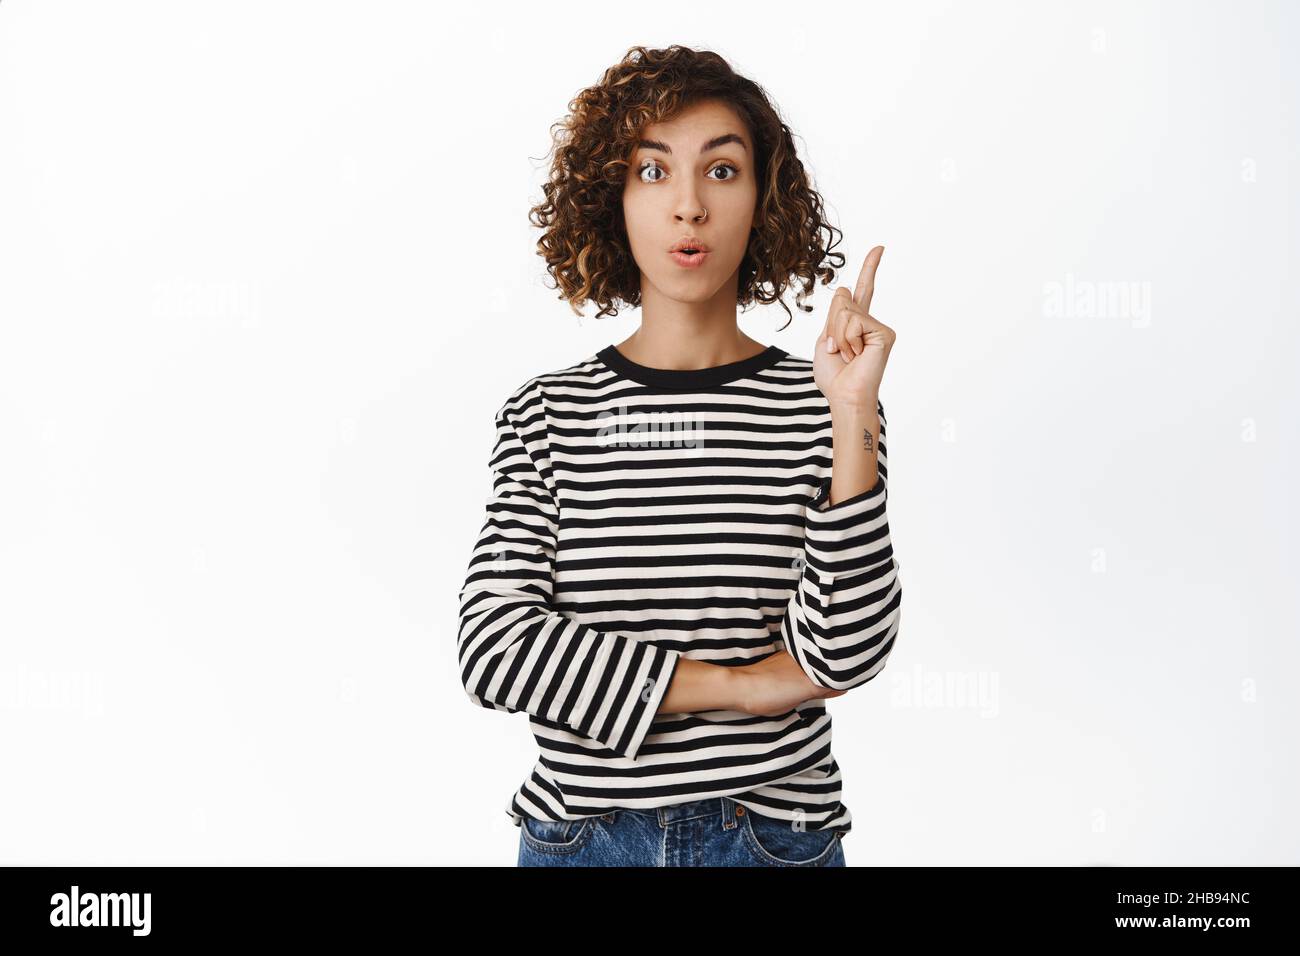 Enthusiastic middle eastern girl pointing finger up, has solution, eureka gesture, suggesting an idea or plan, standing over white background Stock Photo